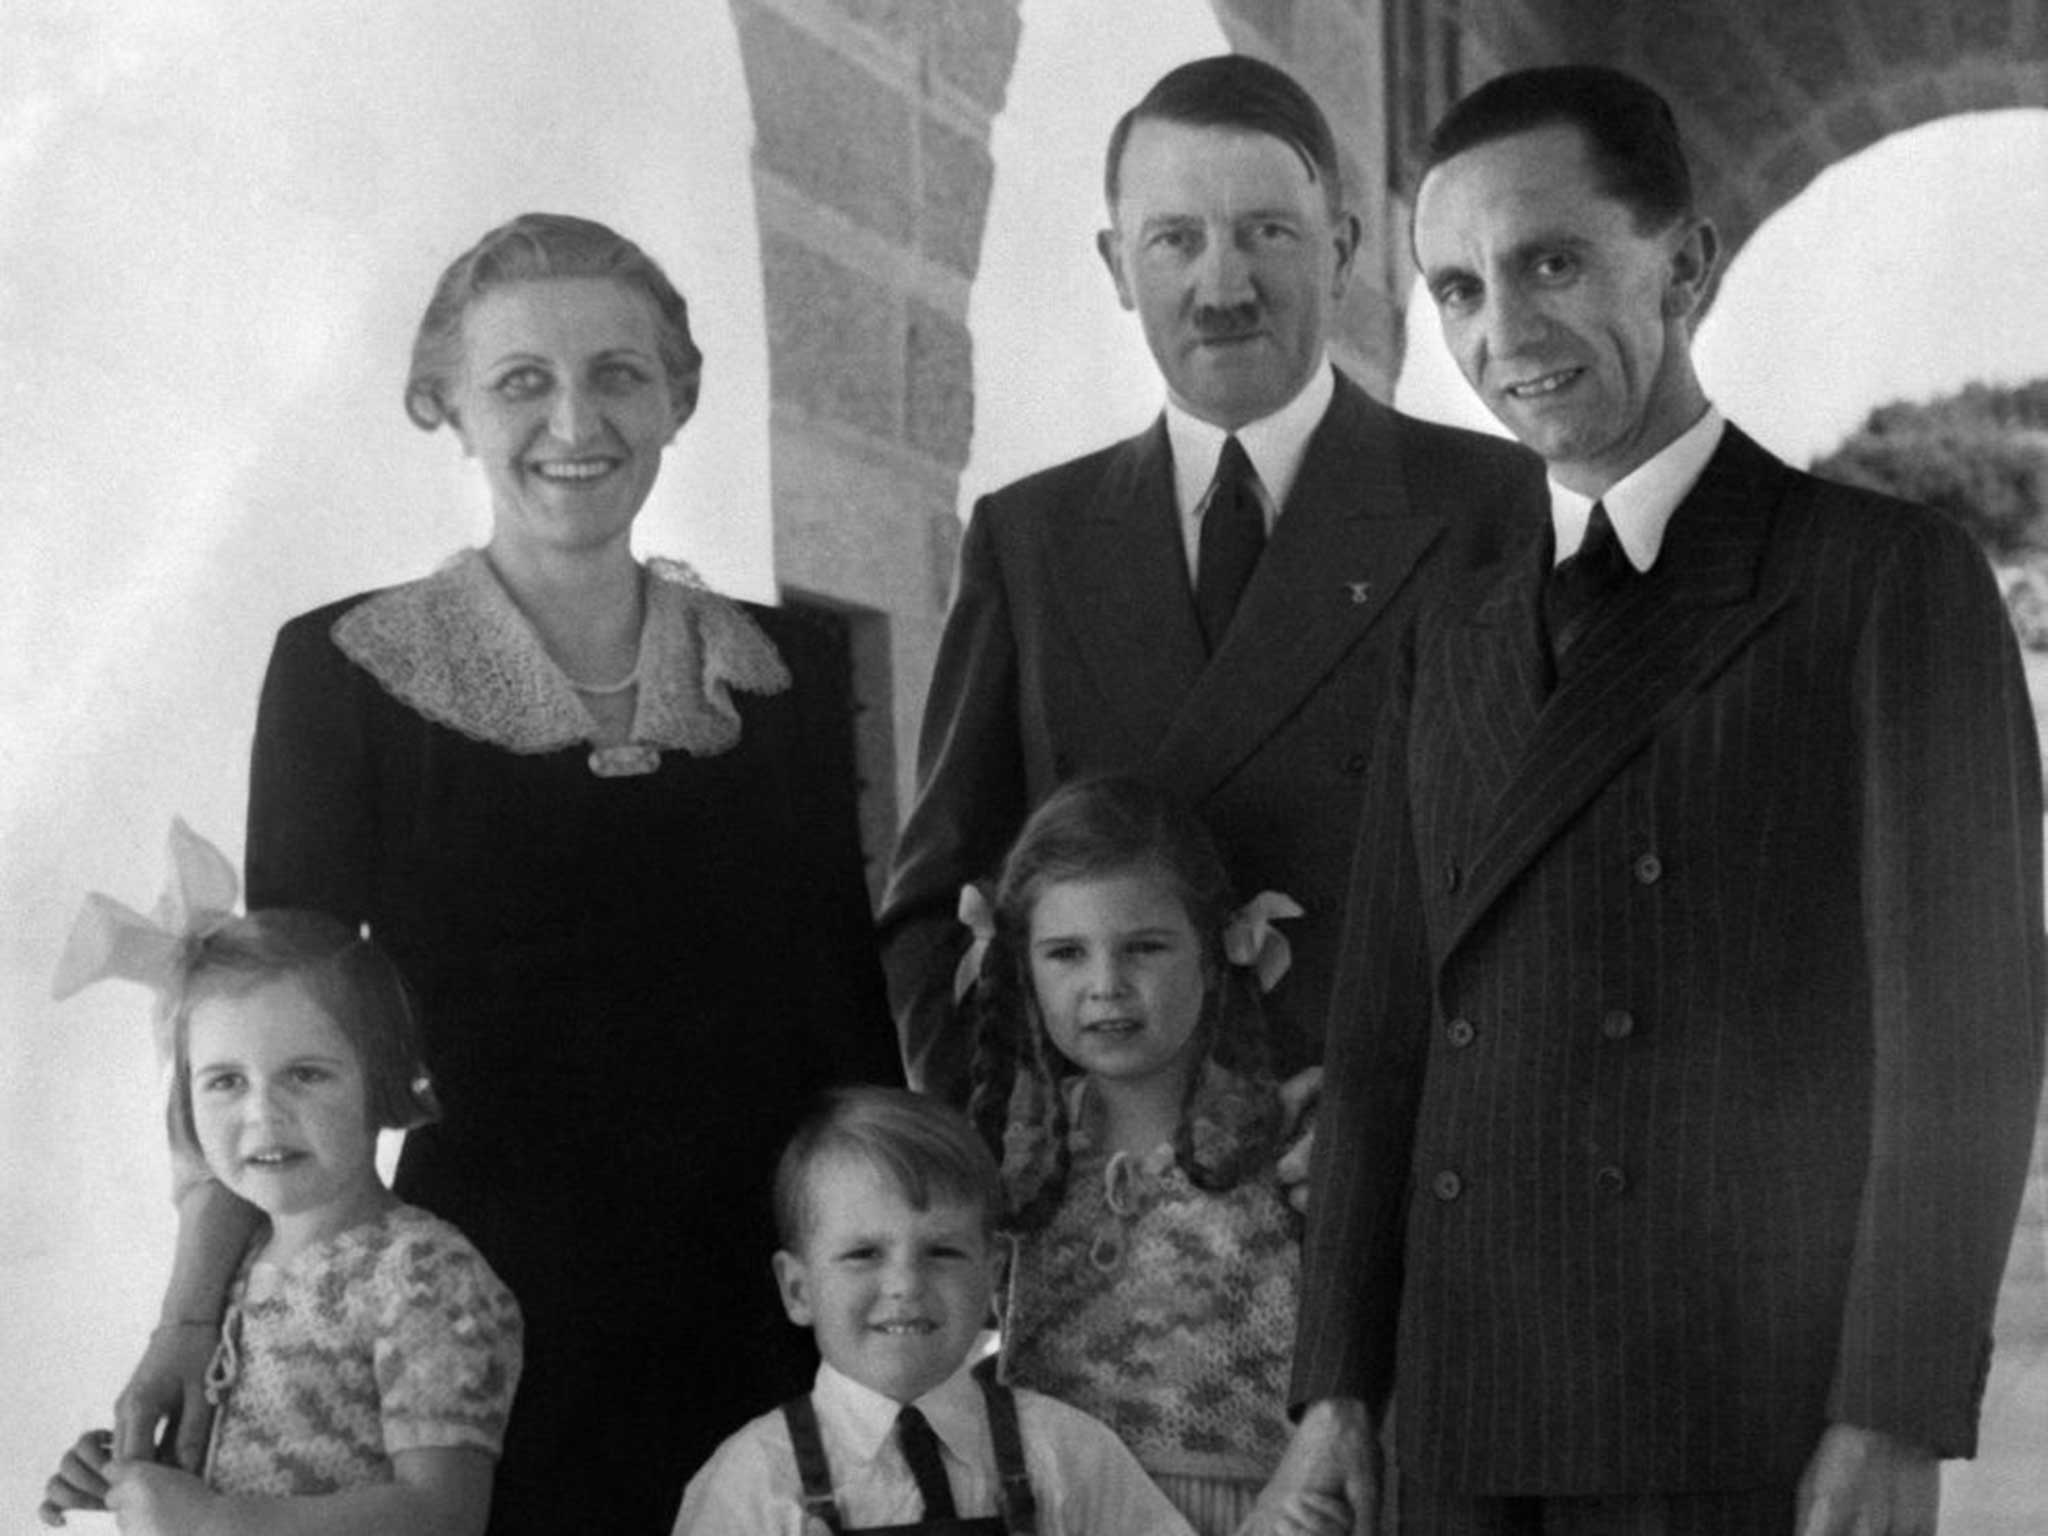 Joseph, Magda and the six Goebbels children with Hitler in 1938